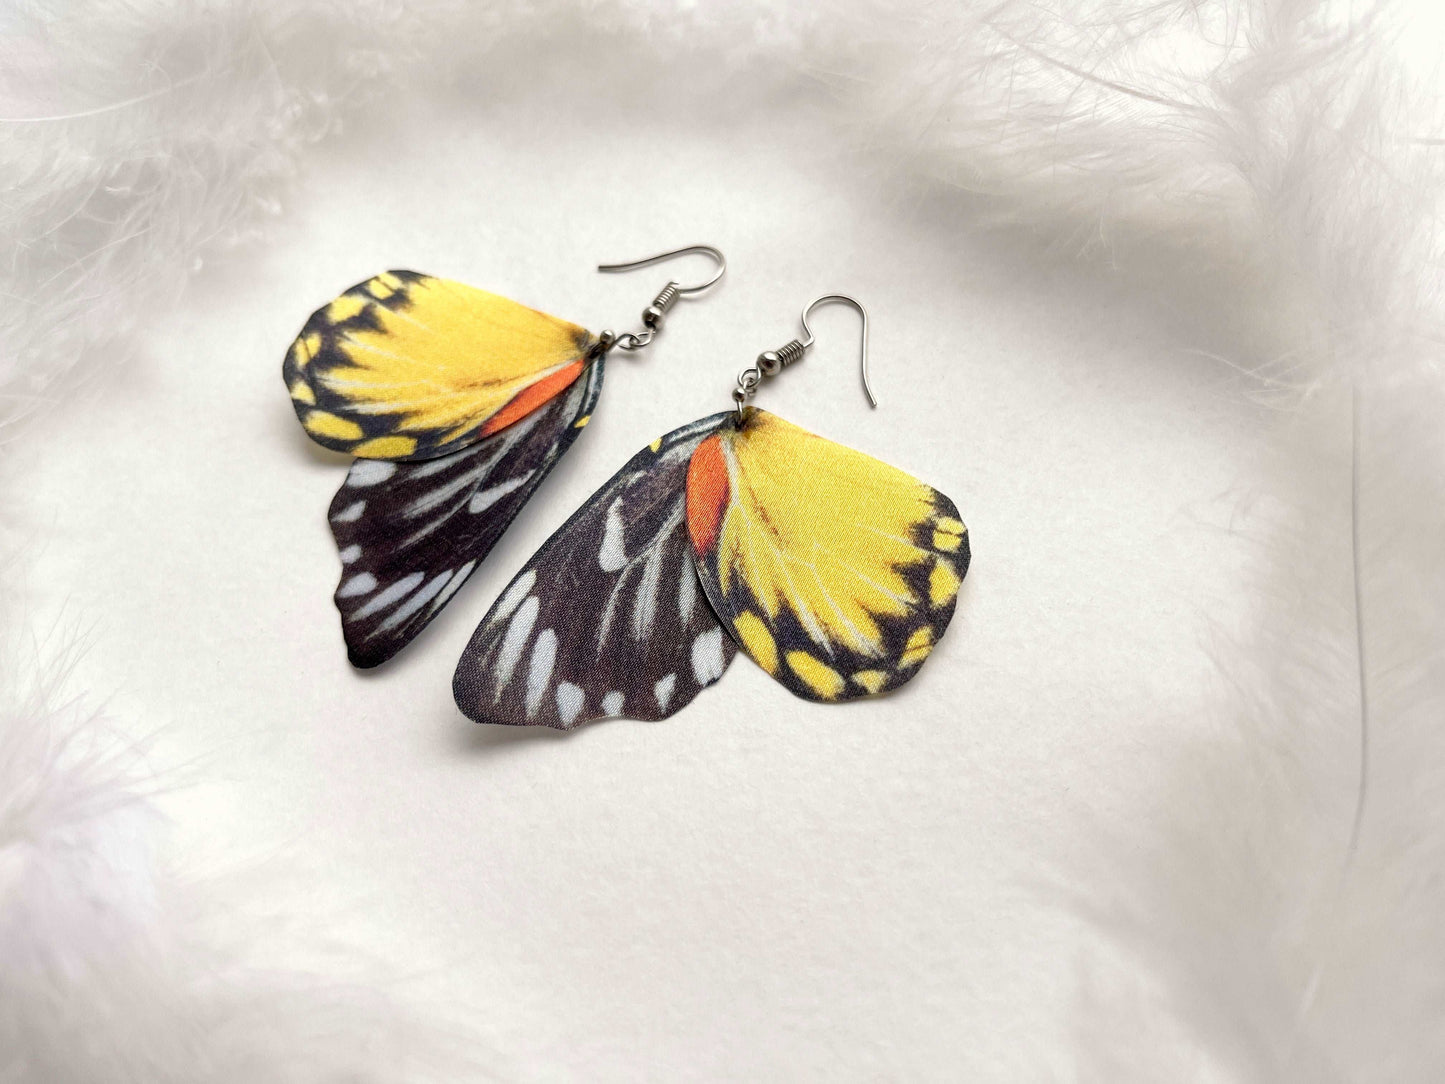 Quirky Earrings with Whimsical Butterfly Wings design